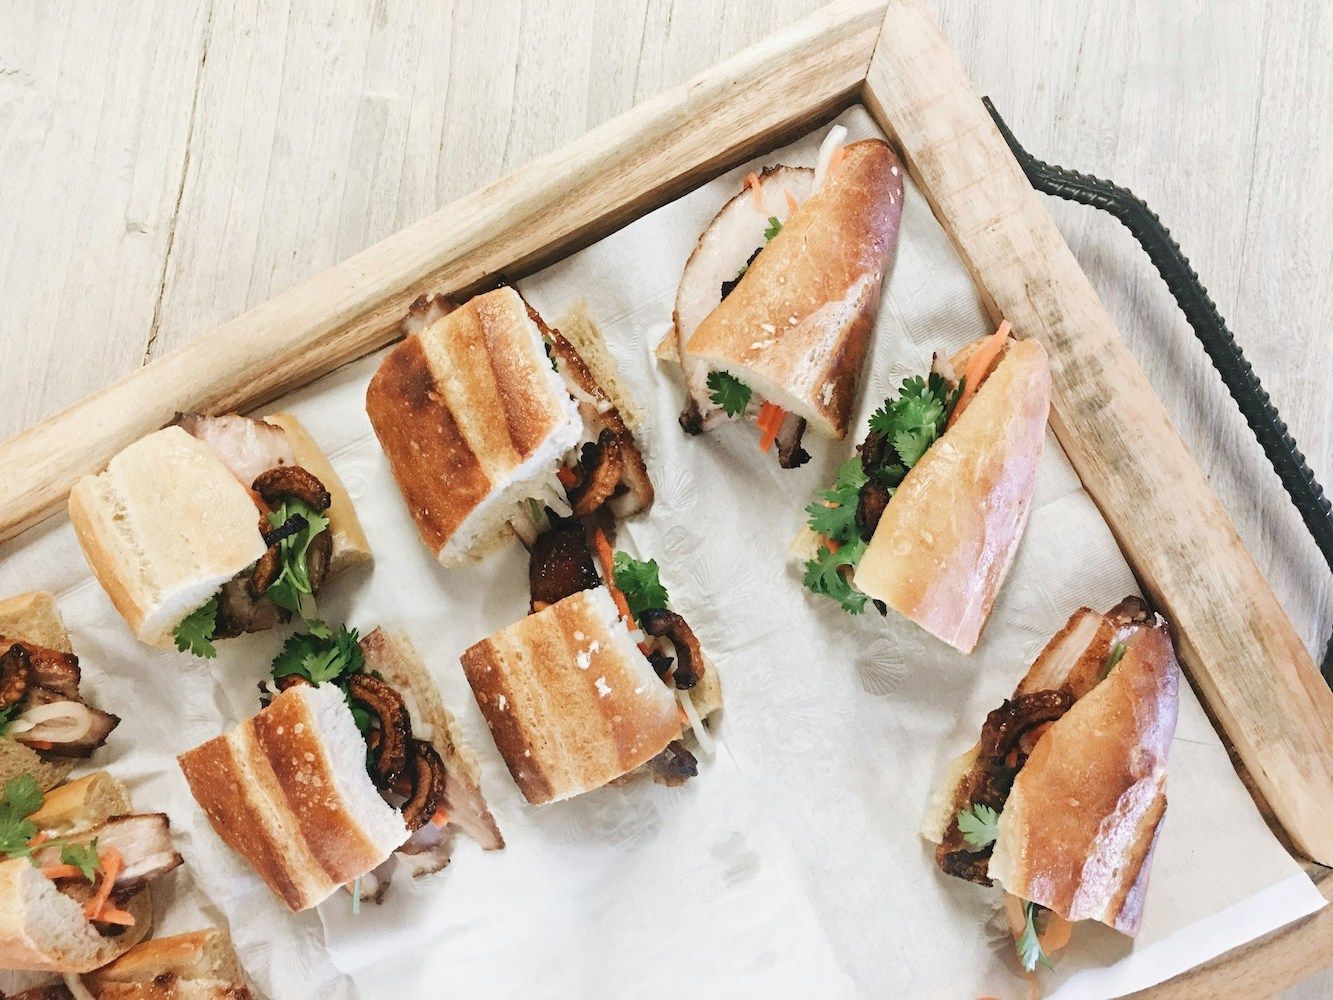 Tasty sandwiches to Level up your business lunch